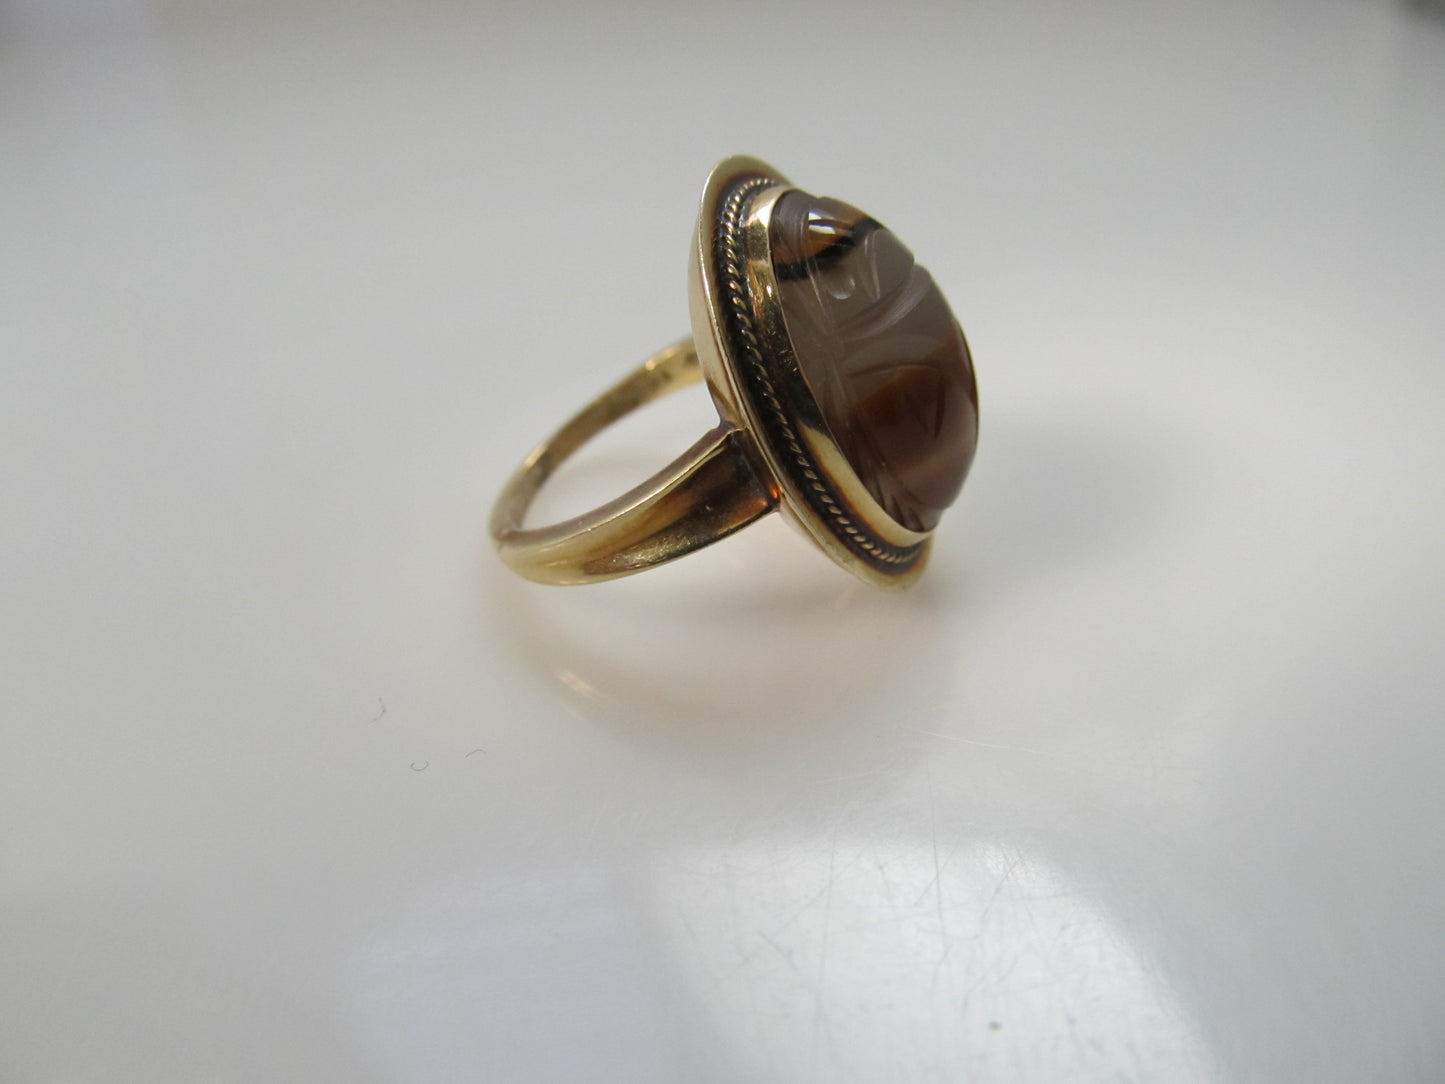 Vintage banded agate scarab ring, 14k yellow gold